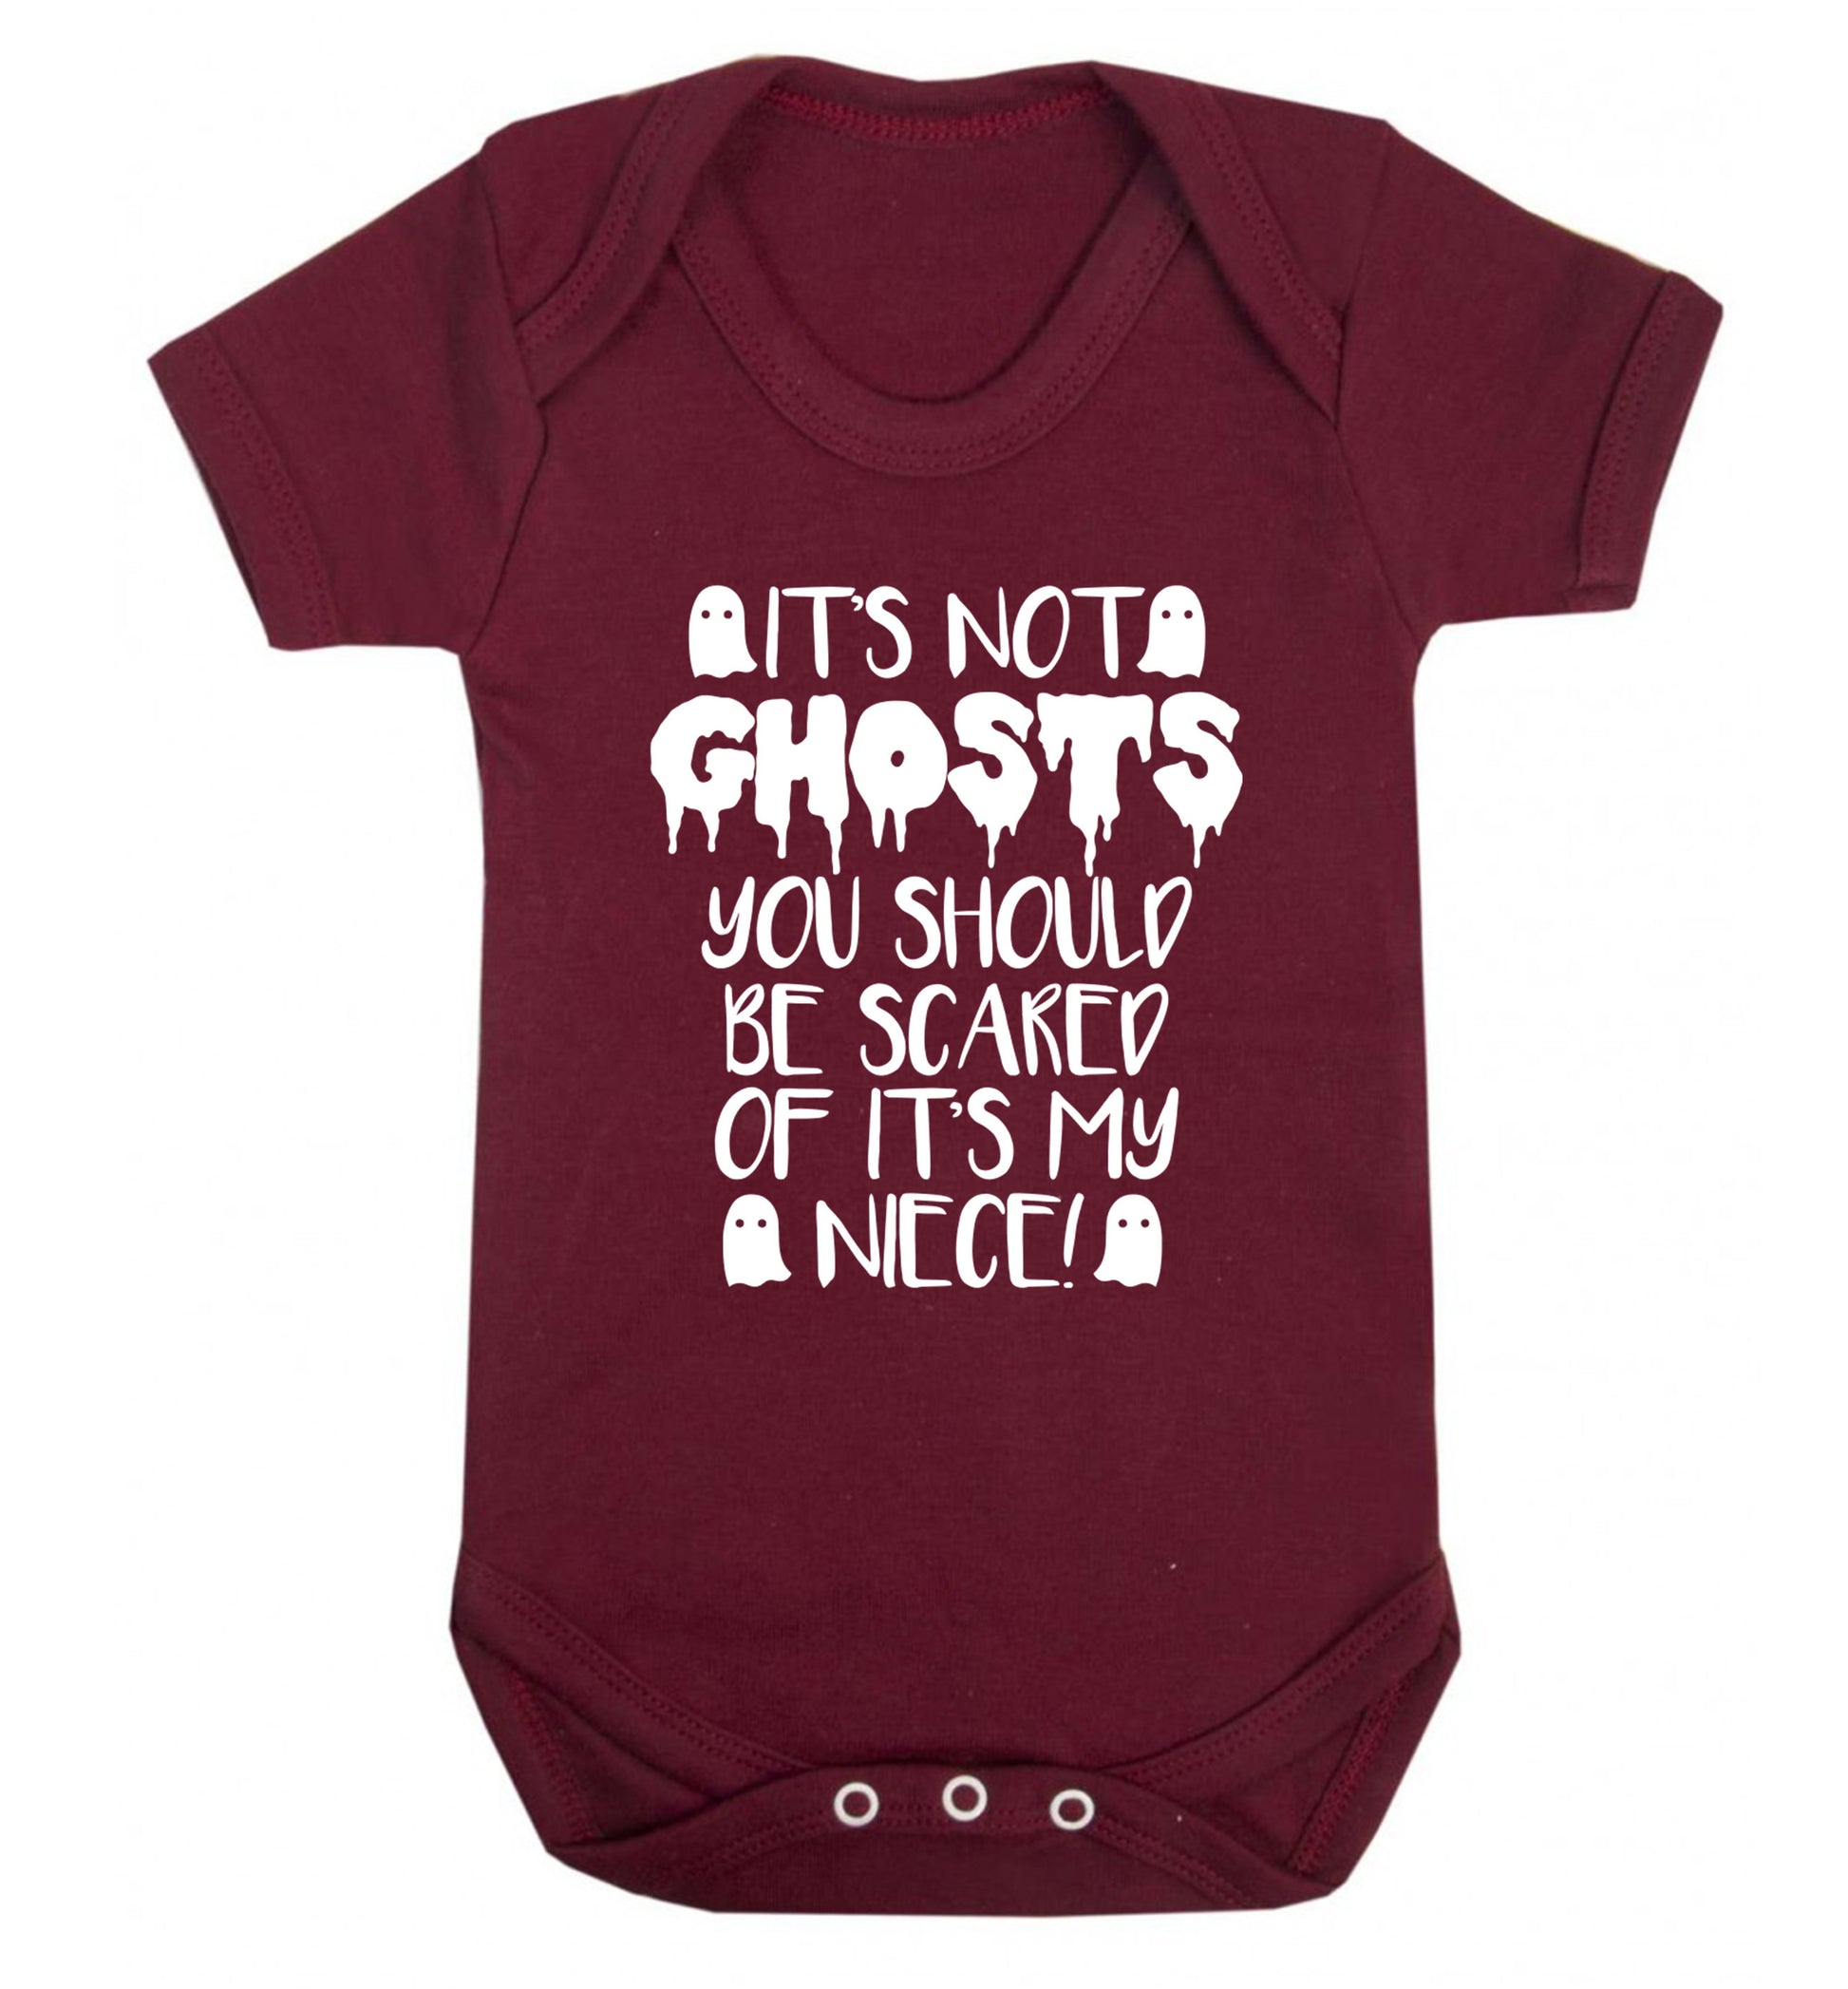 It's not ghosts you should be scared of it's my niece! Baby Vest maroon 18-24 months